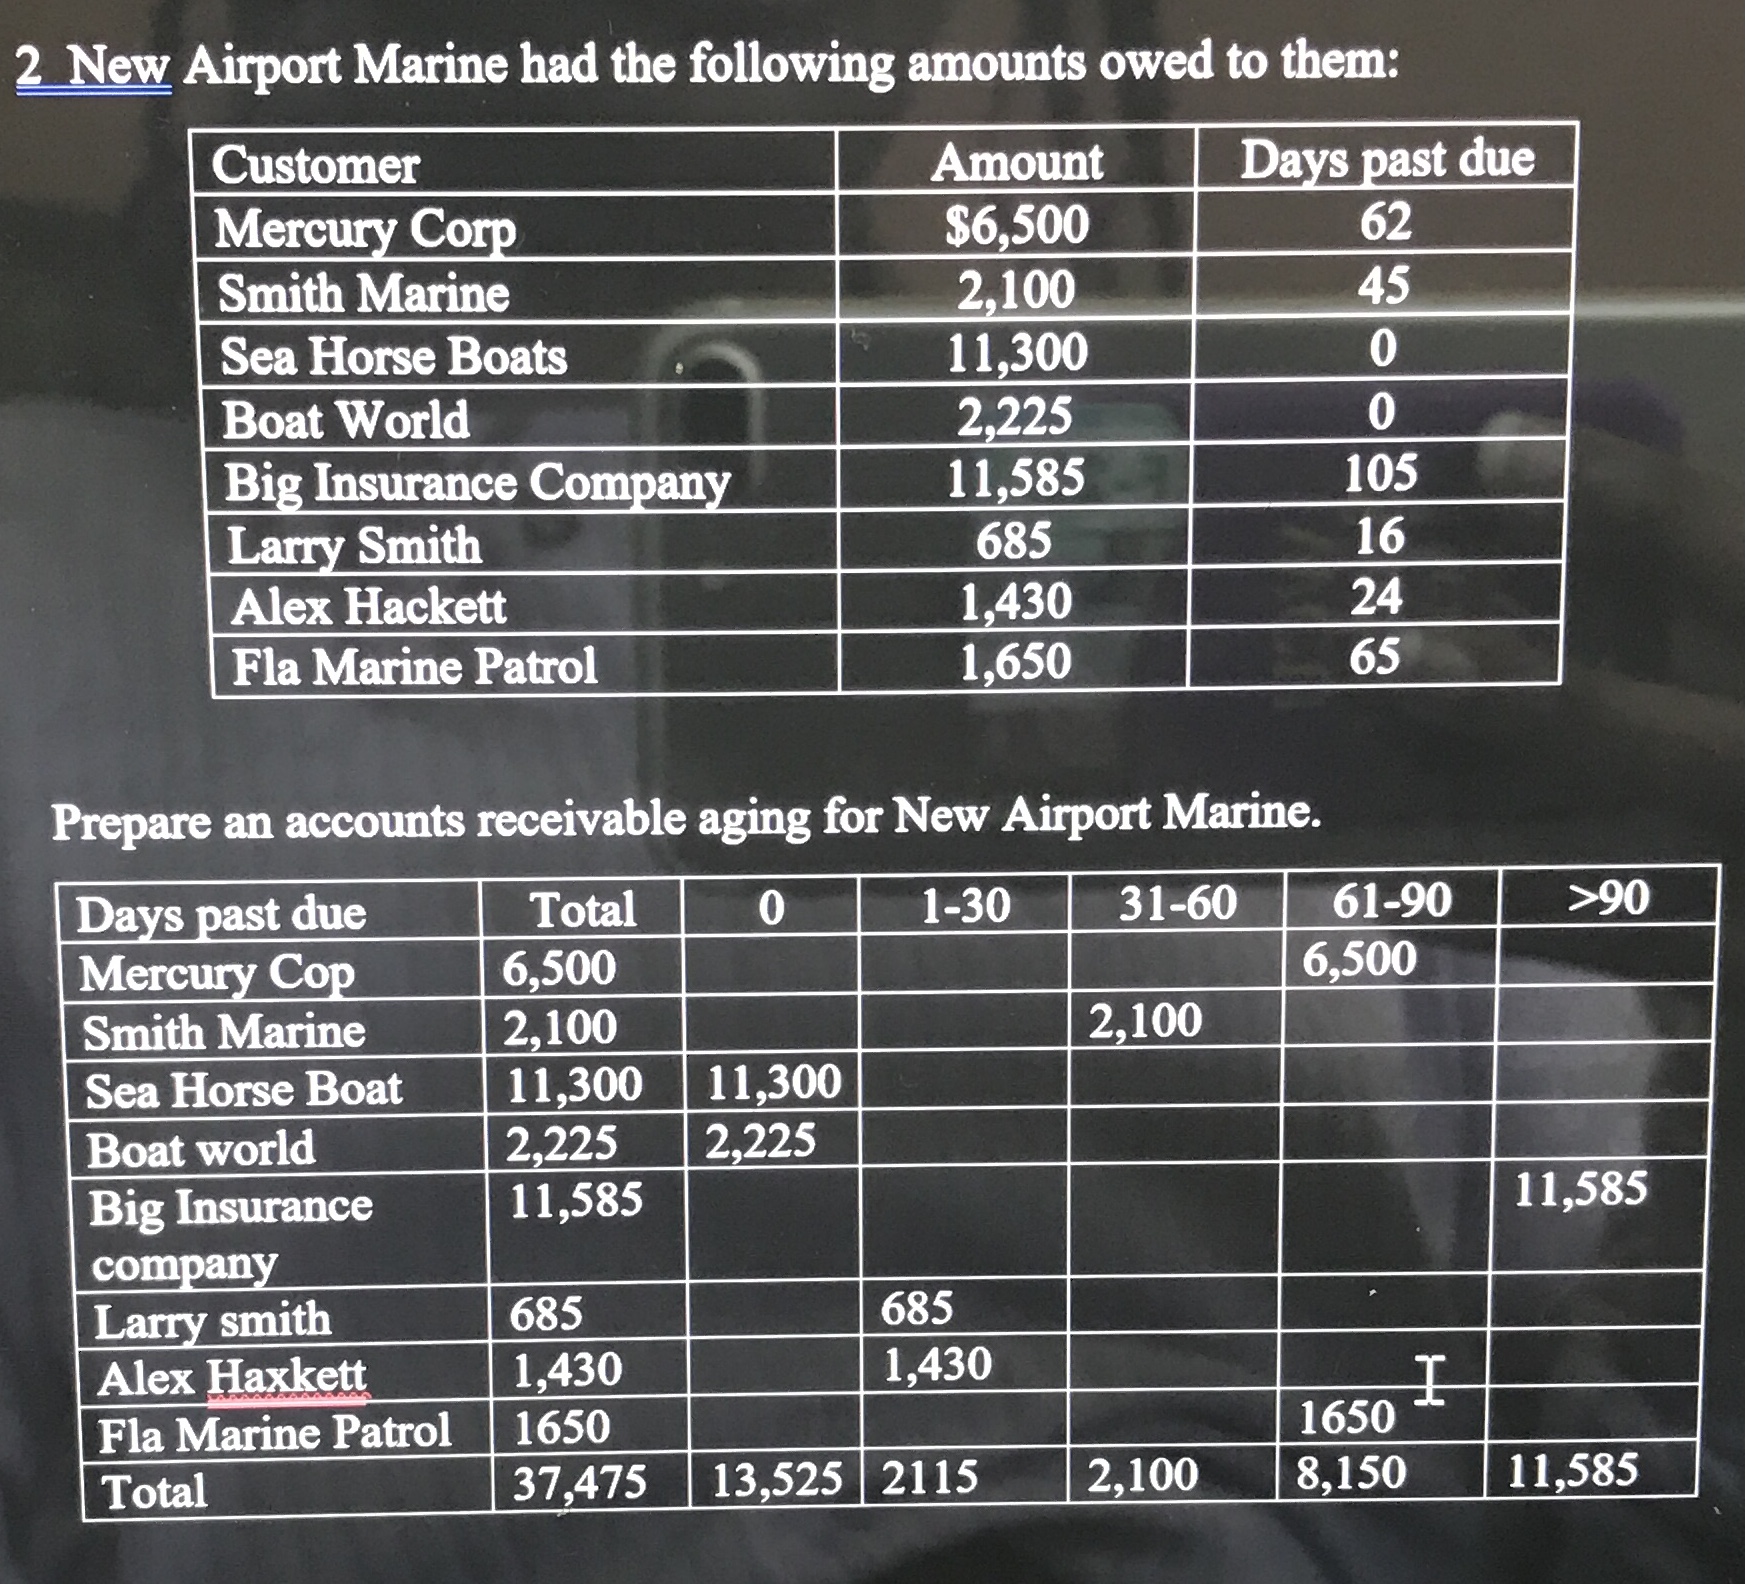 2 New Airport Marine had the following amounts owed to them: Amount $6,500 2,100 11,300 2,225 11,585 685